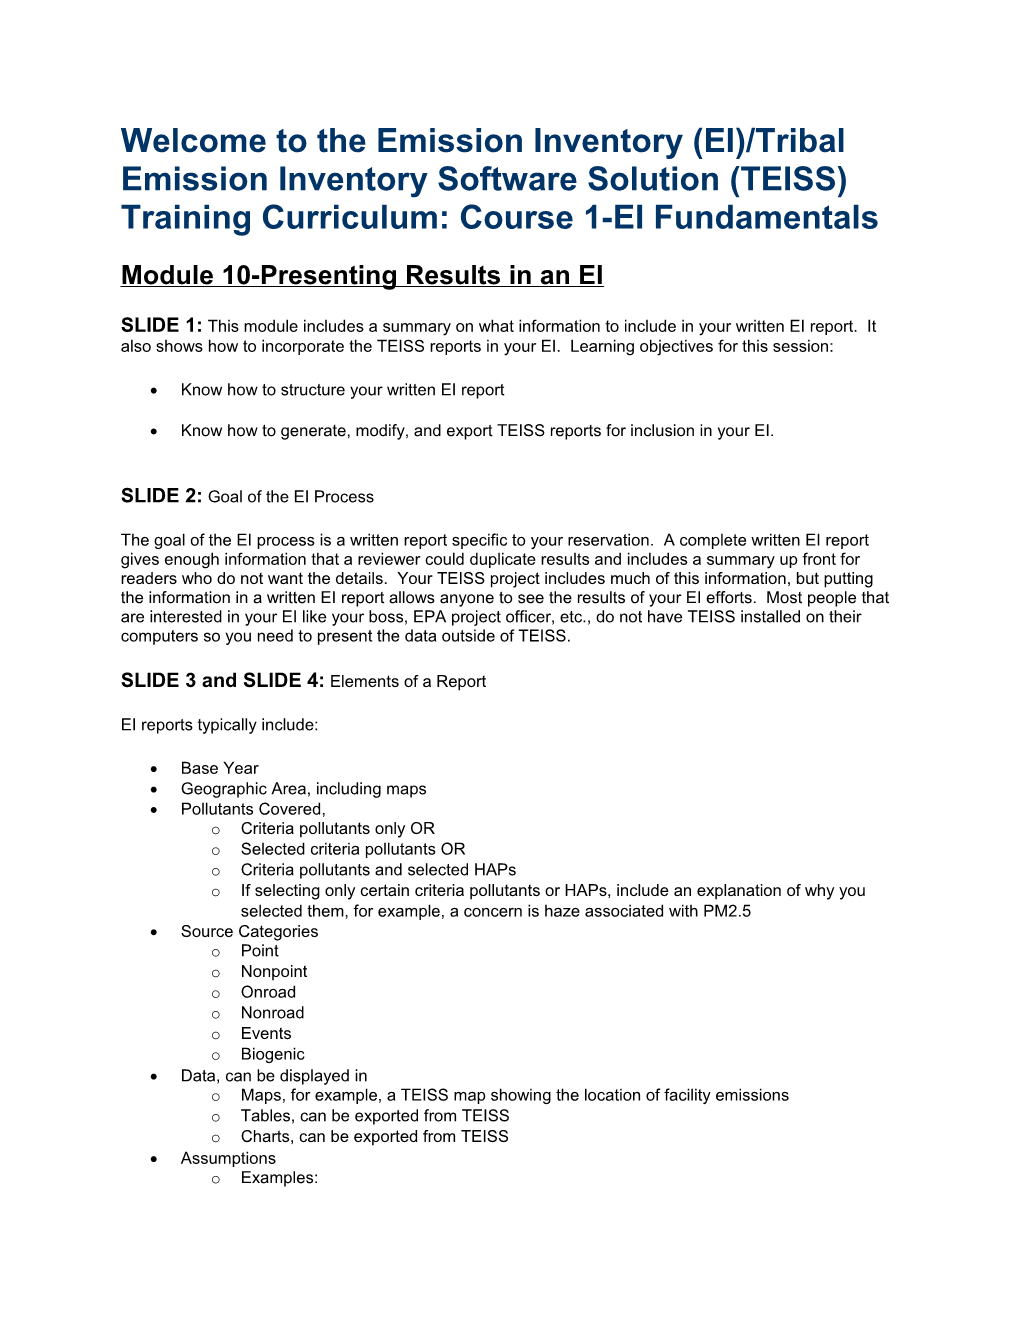 Welcome to the Emission Inventory (EI)/Tribal Emission Inventory Software Solution (TEISS)